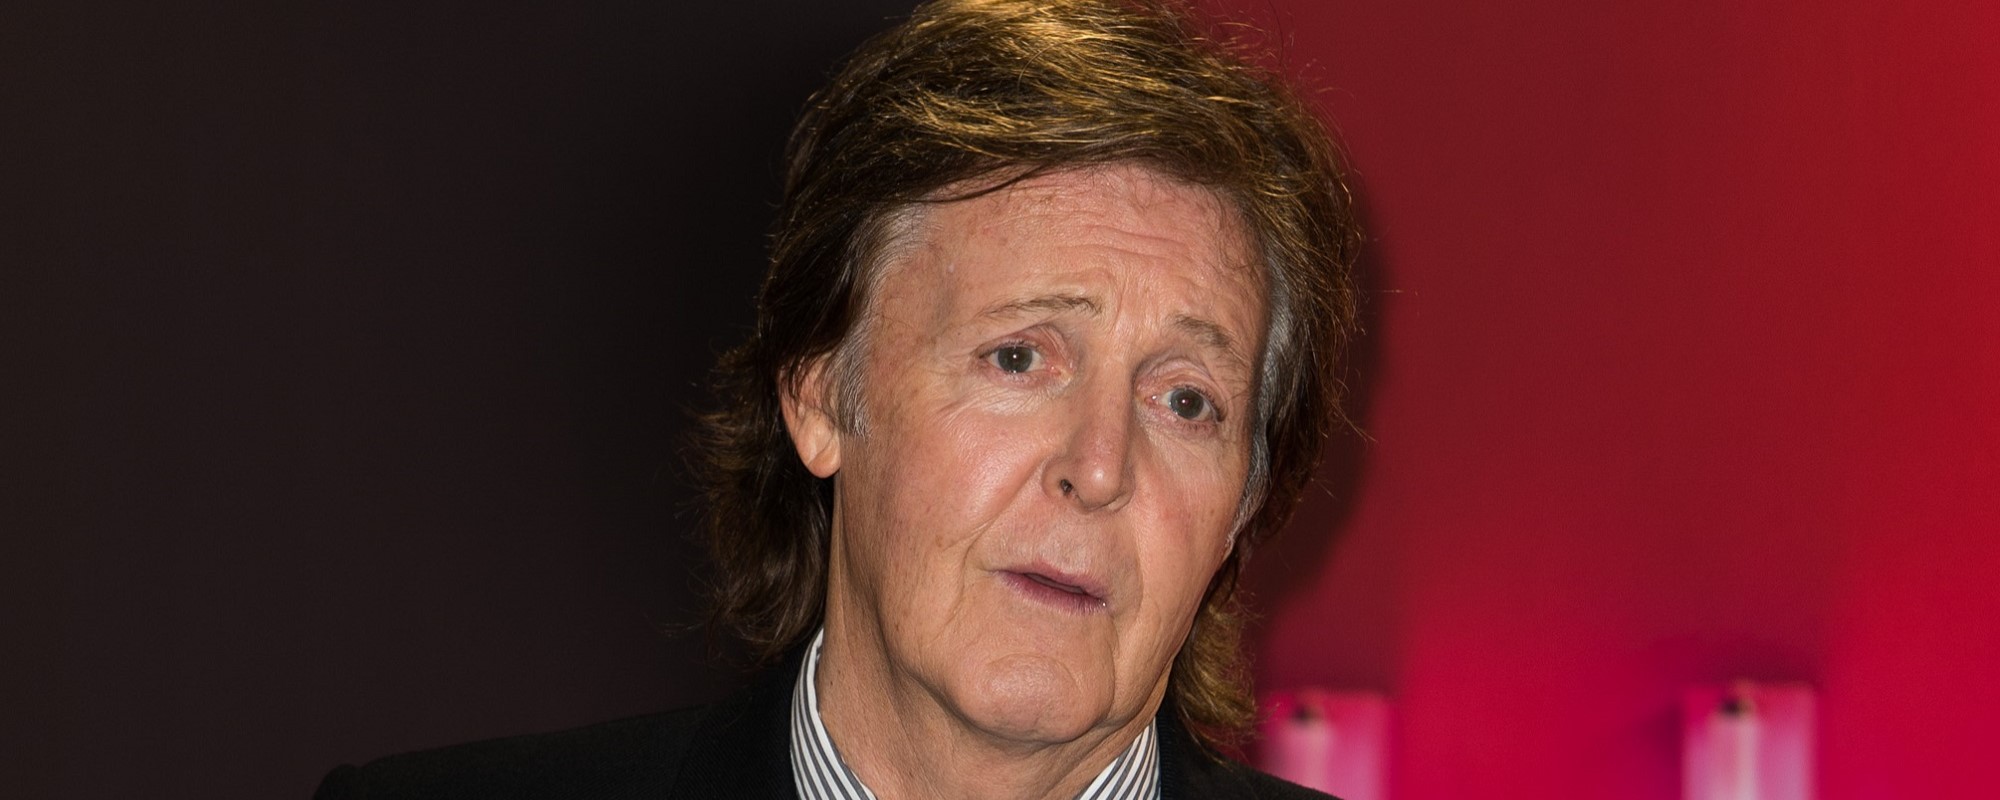 Live and Let Cry: 3 Songs That Brought Tears to Paul McCartney’s Eyes